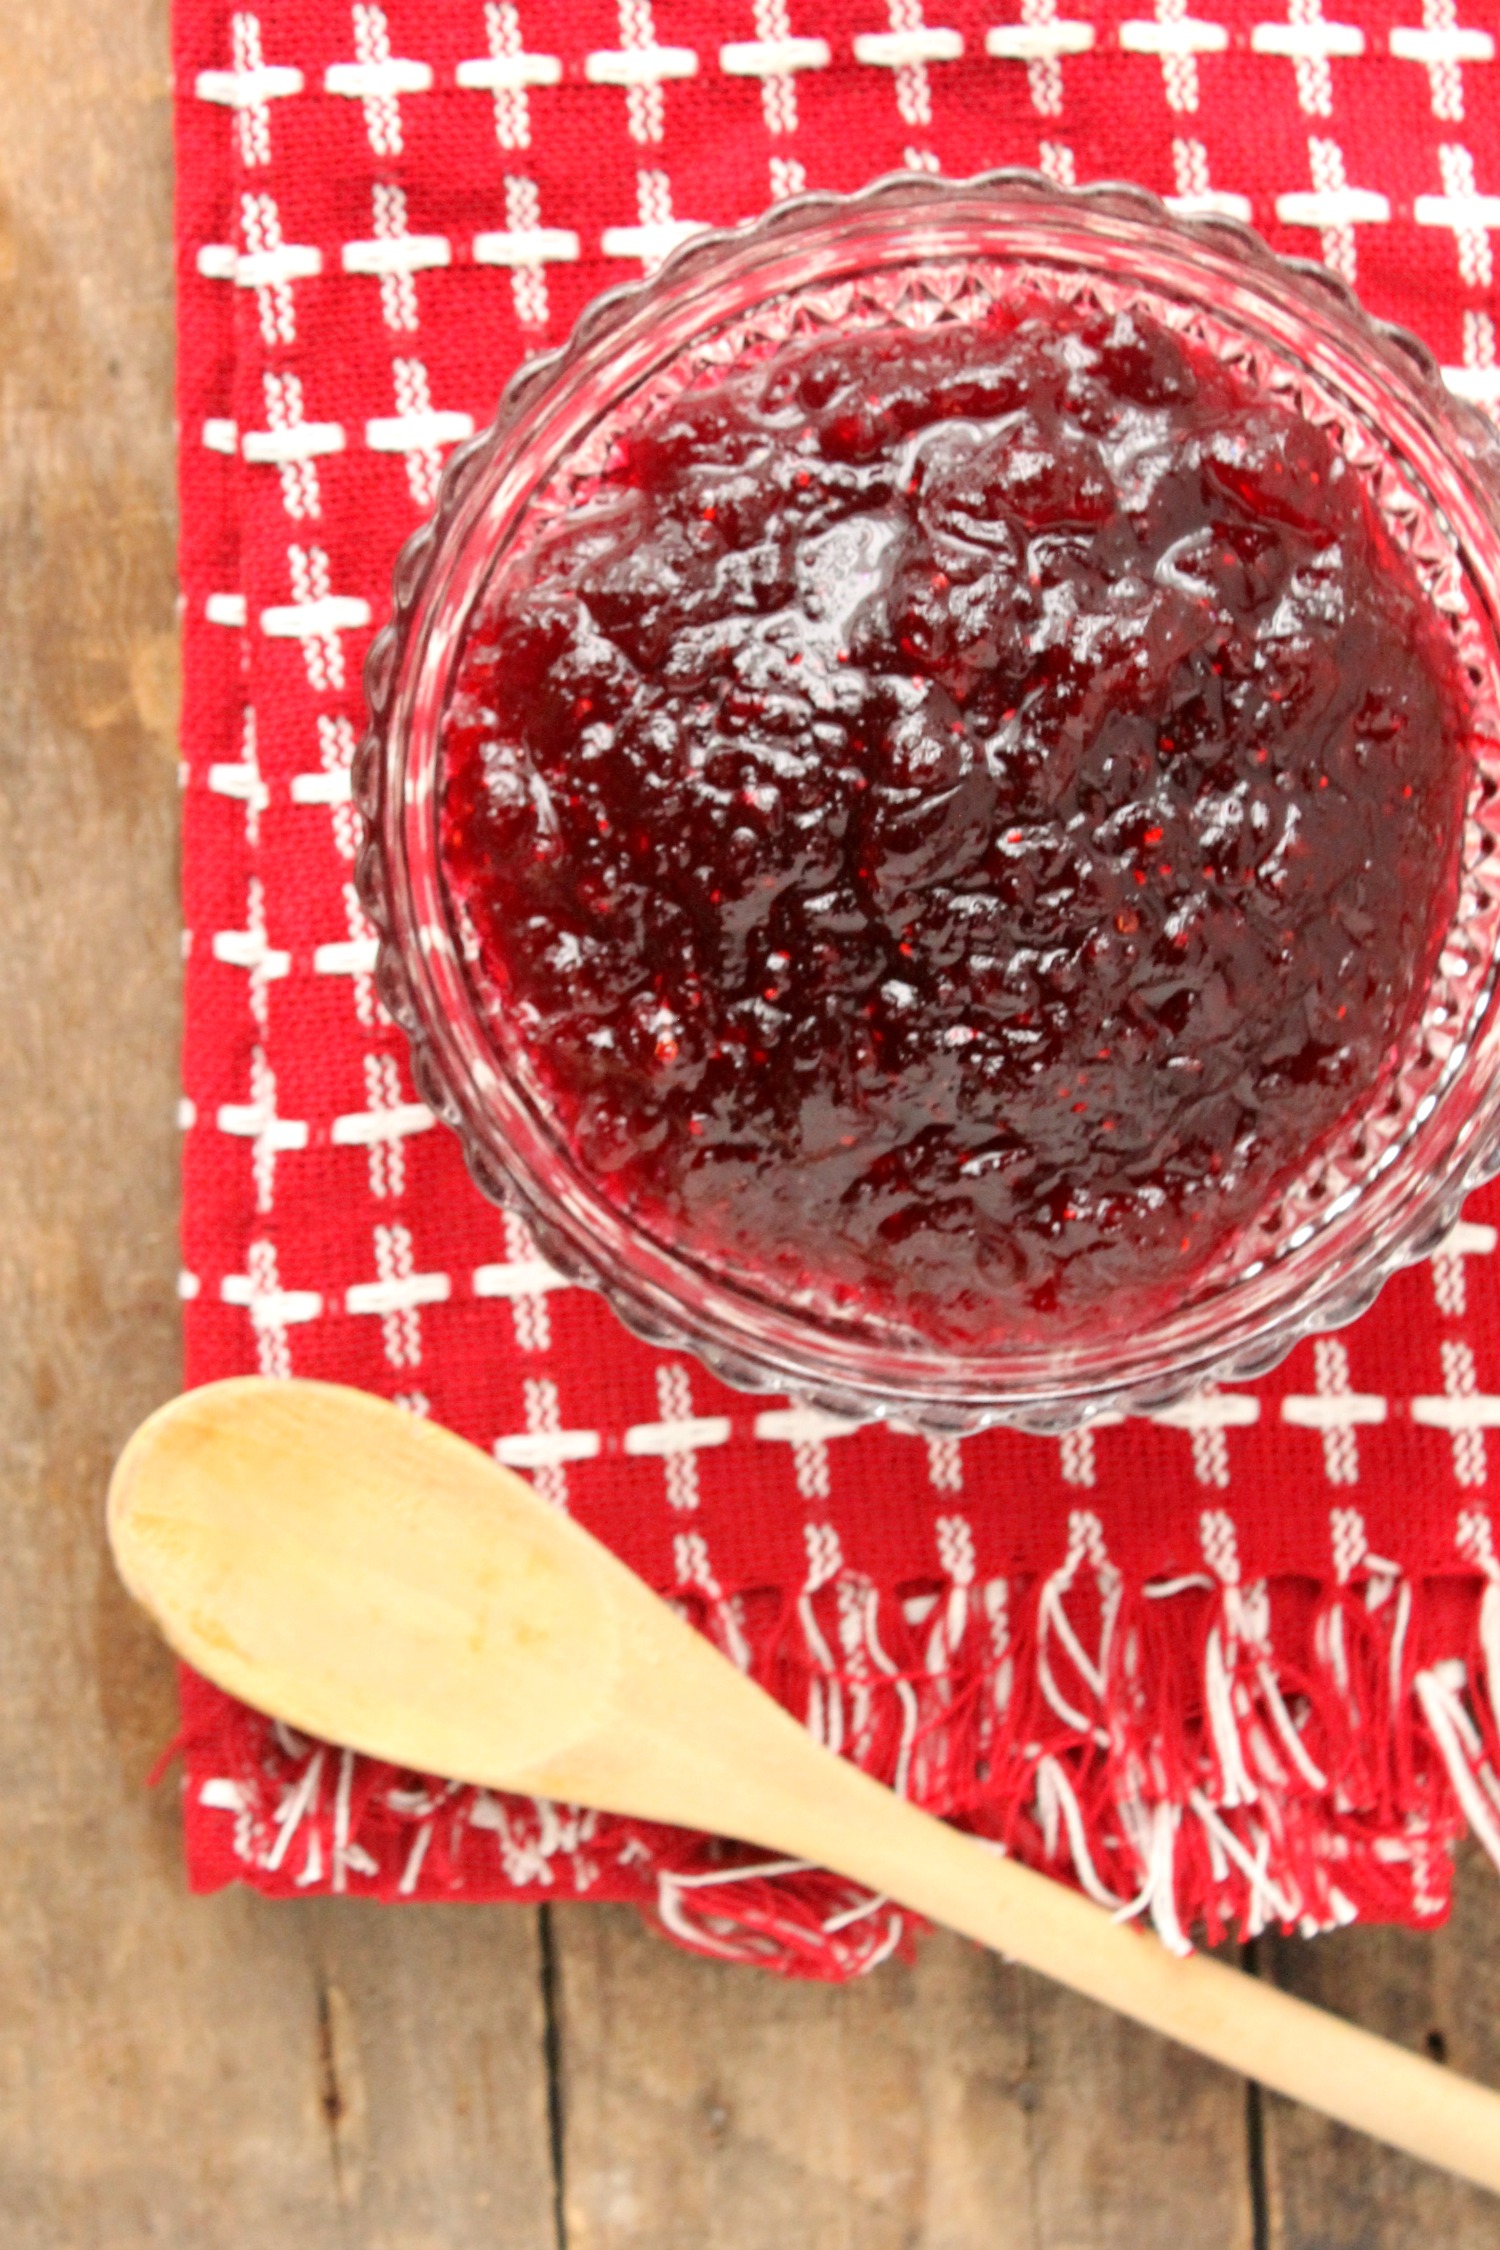 Upgrade your holiday meal with this Easy Homemade Cranberry Sauce!